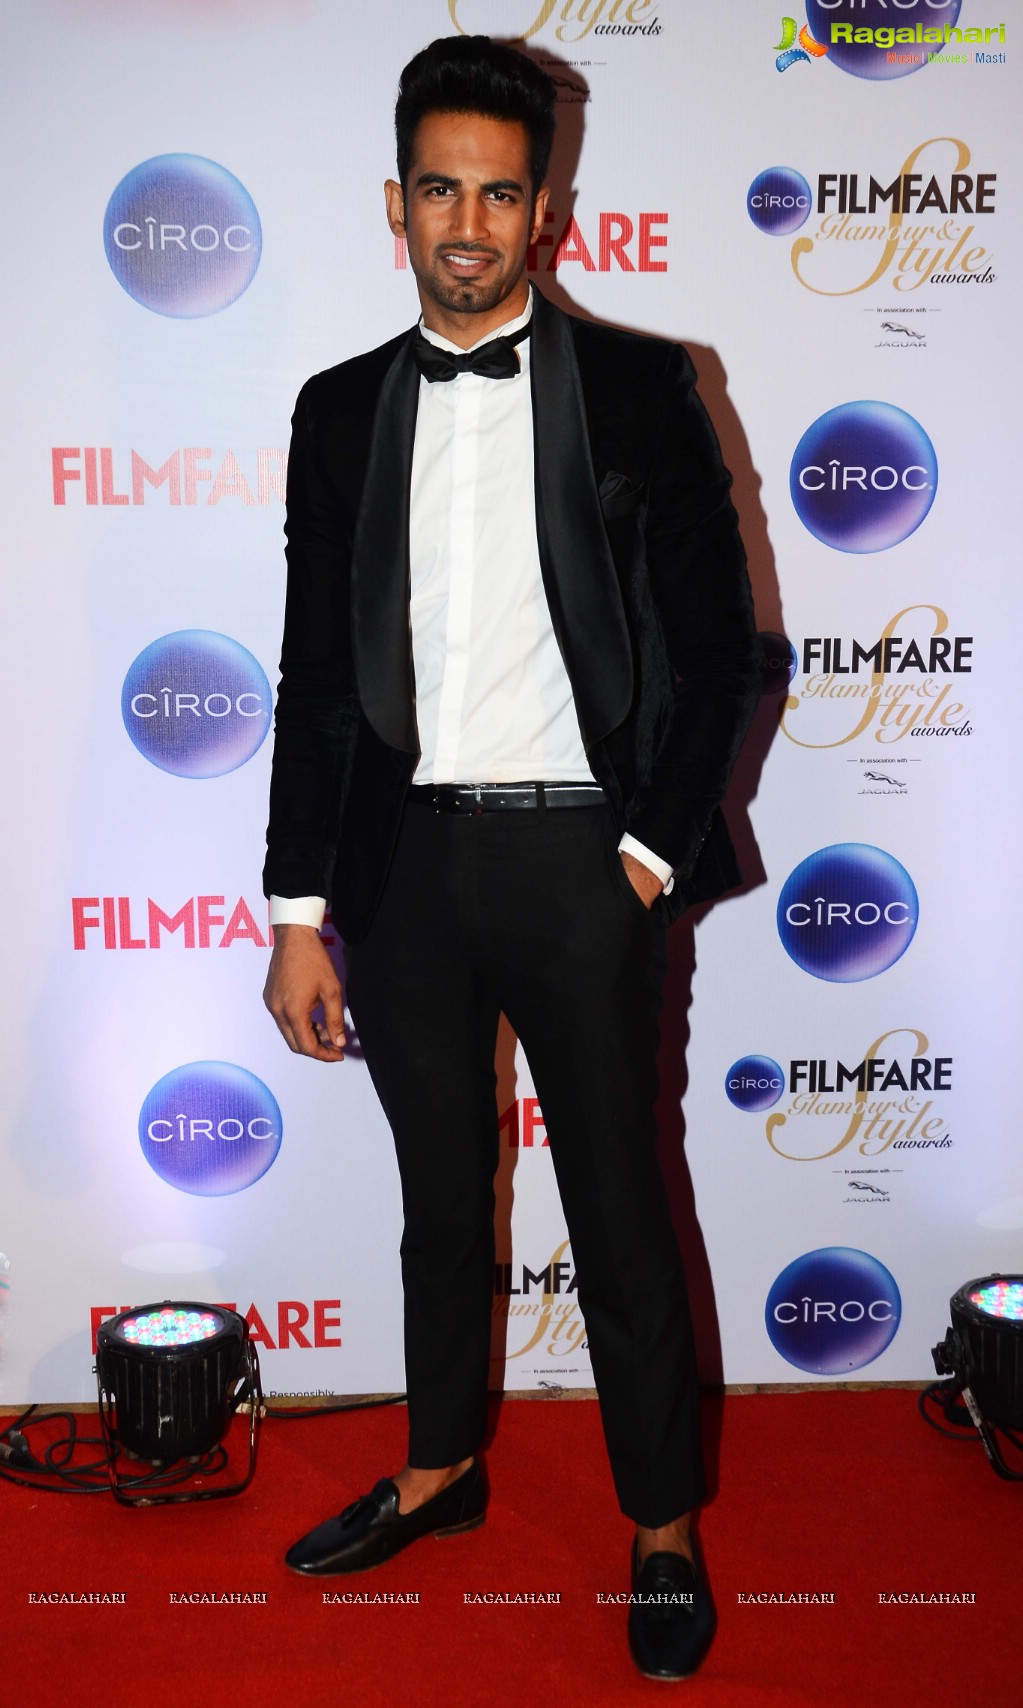 Ciroc Filmfare Glamour and Style Awards